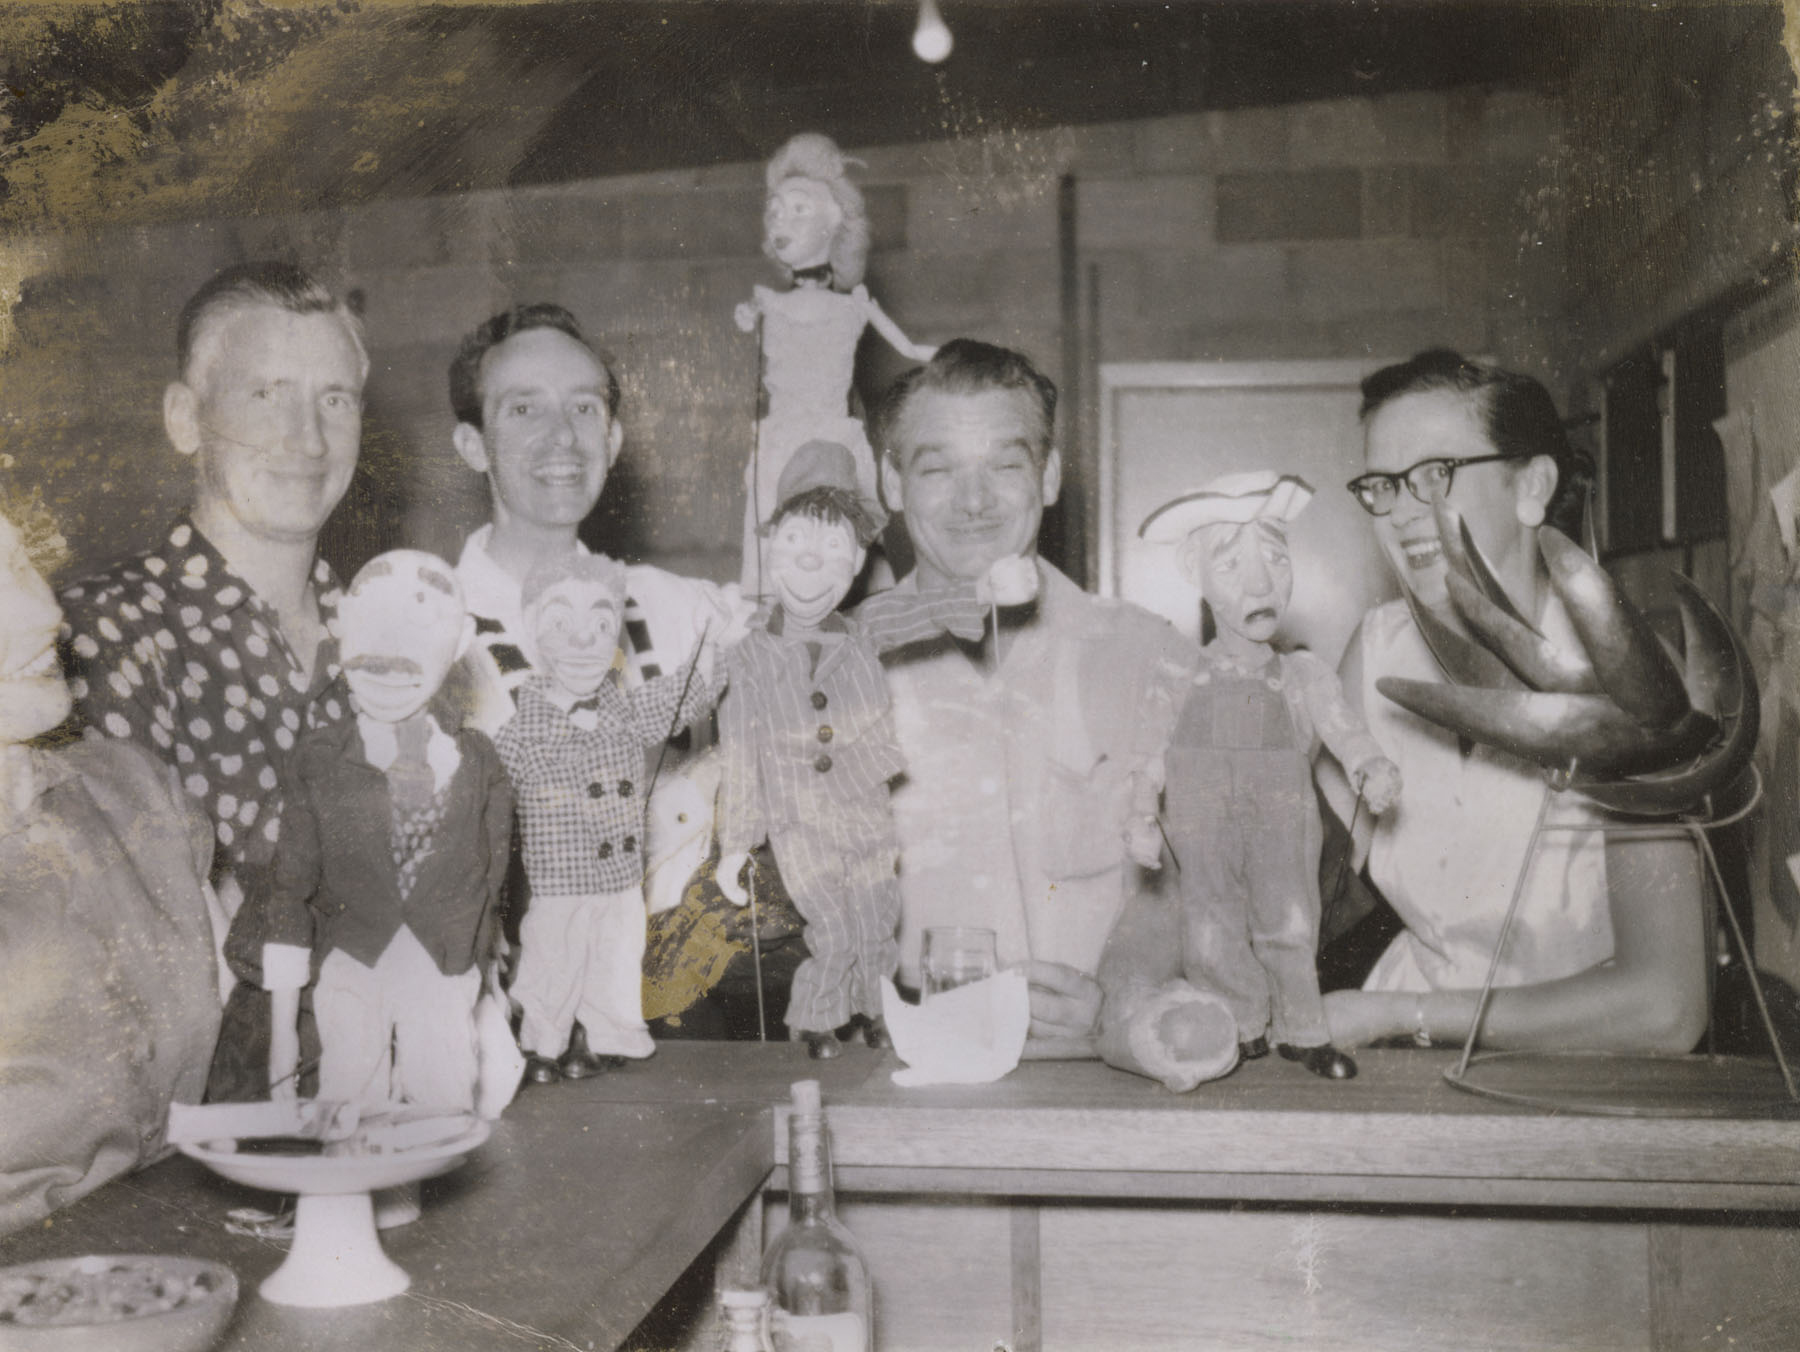 Faded photo of four people standing behind a counter on which are propped four marionettes and a sculpture.